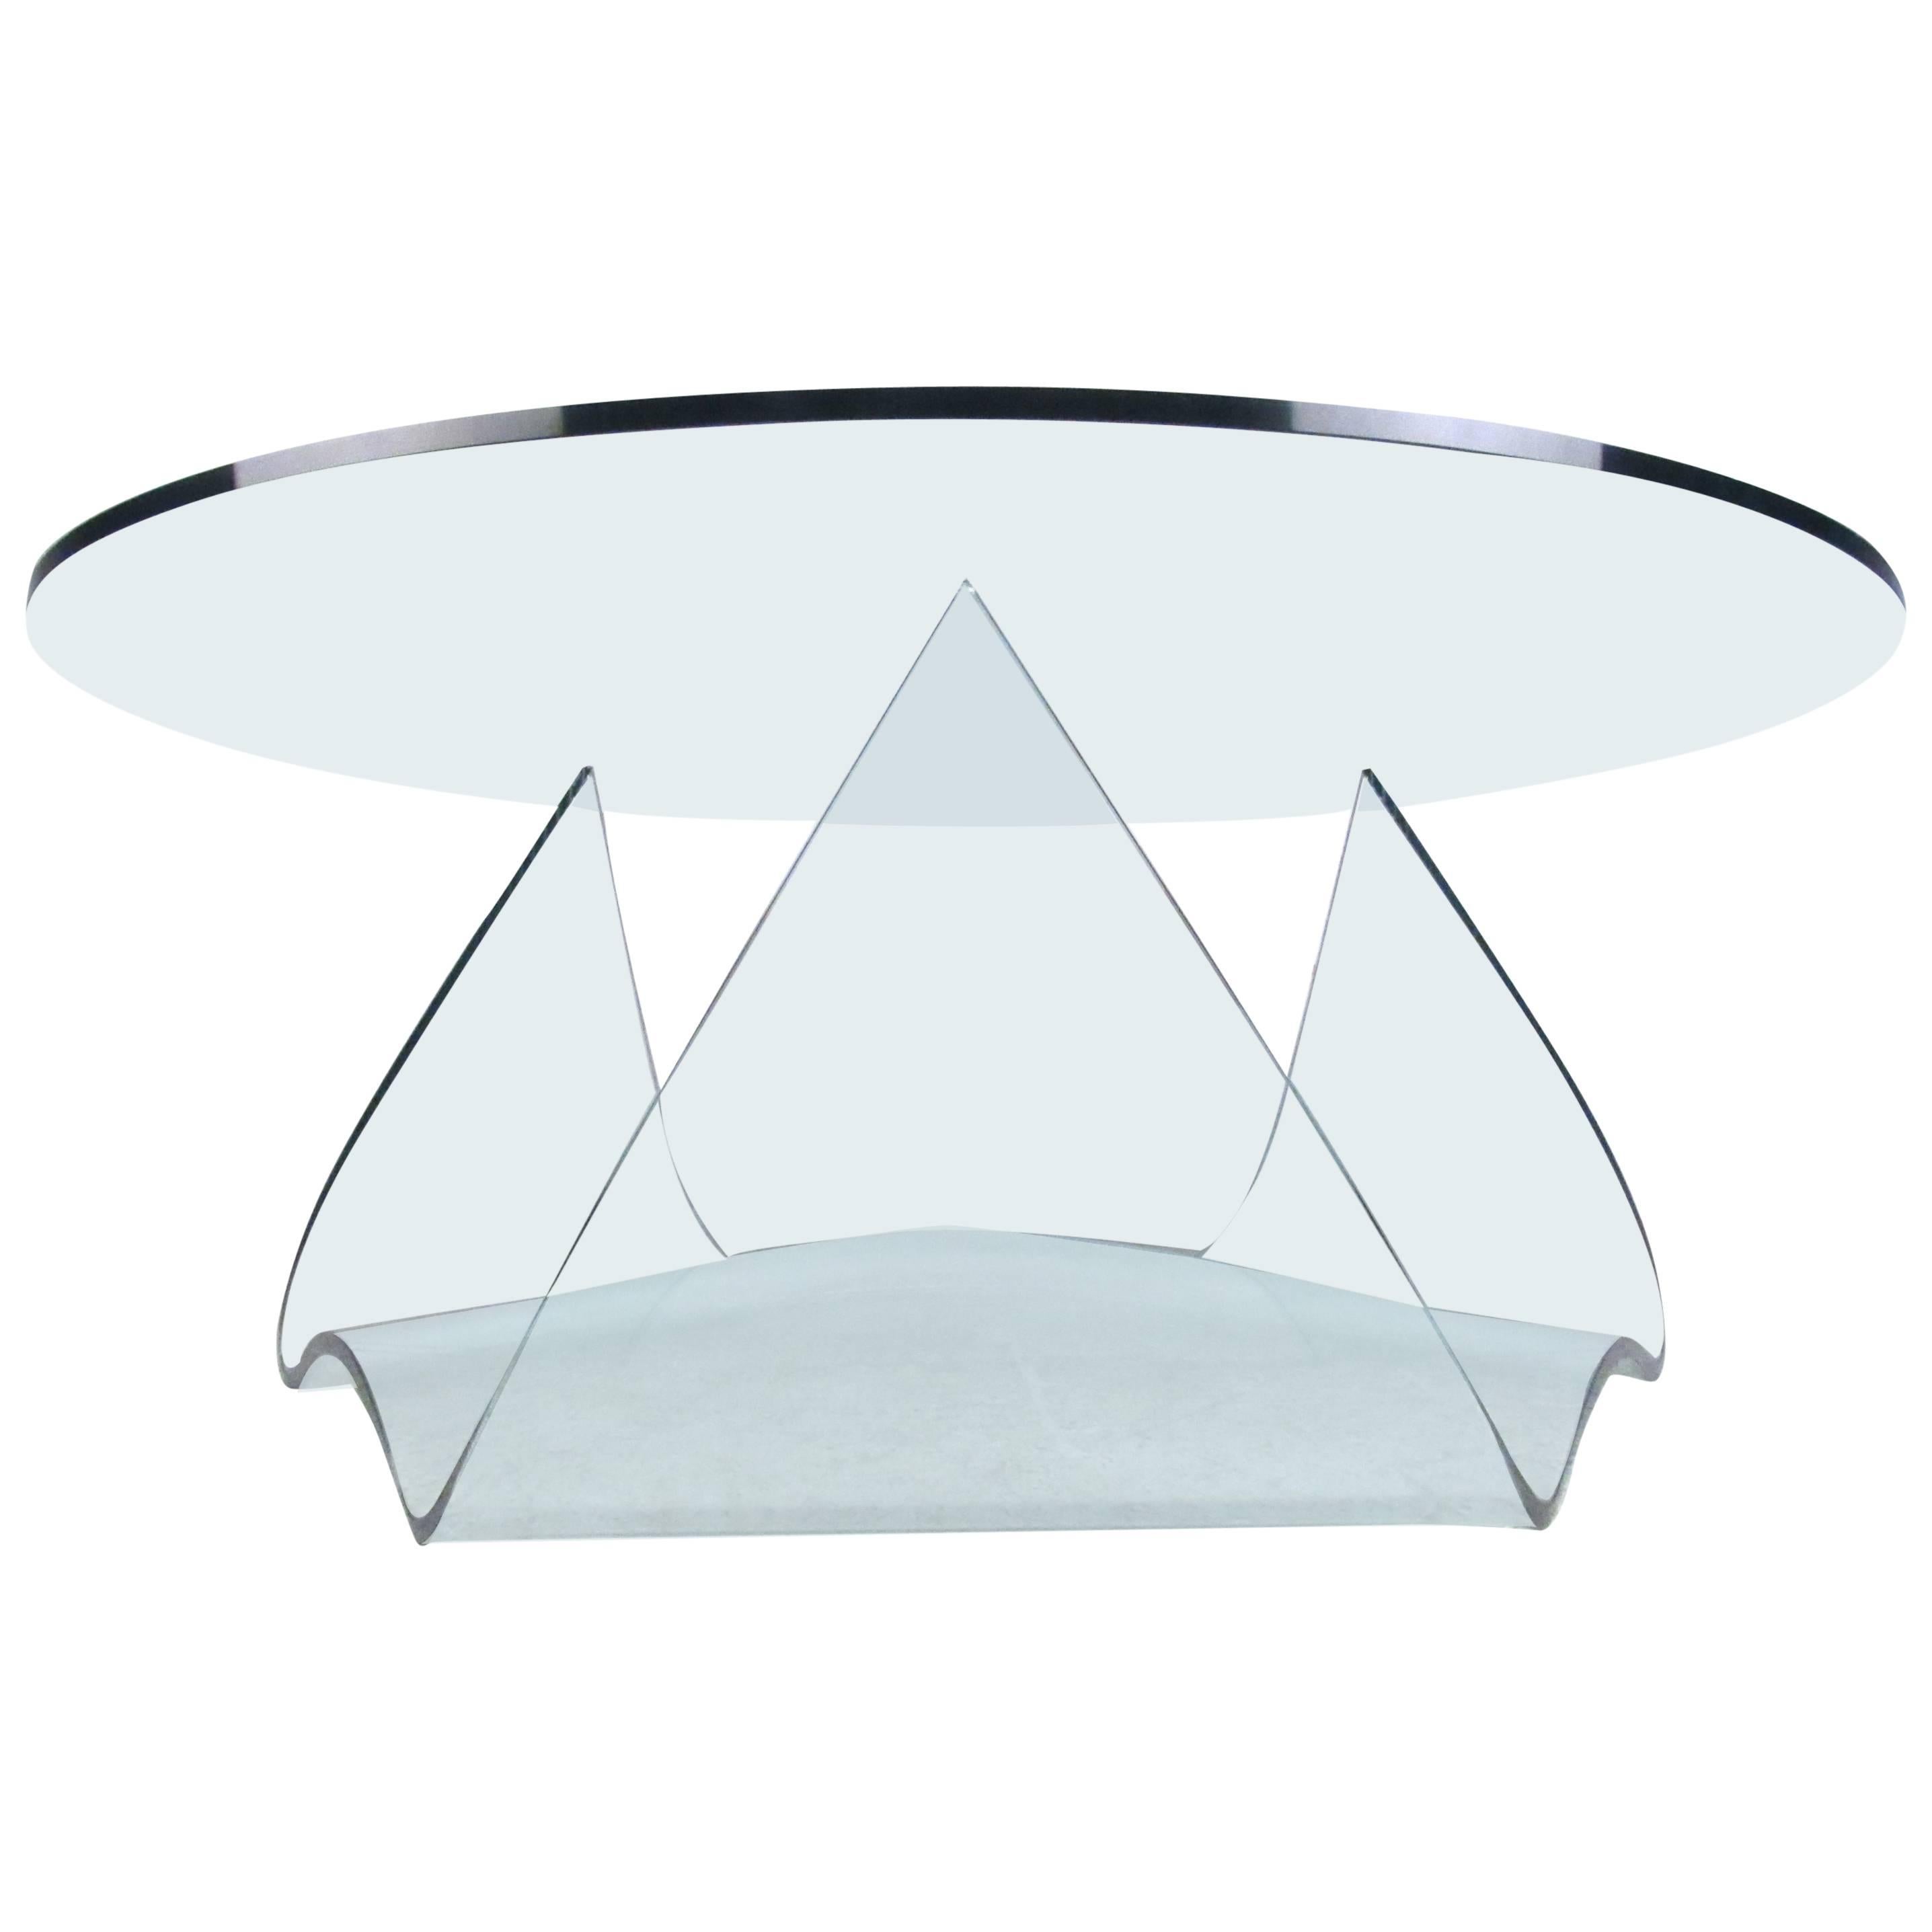 Unique Mid-Century Molded Glass Coffee Table by Pace